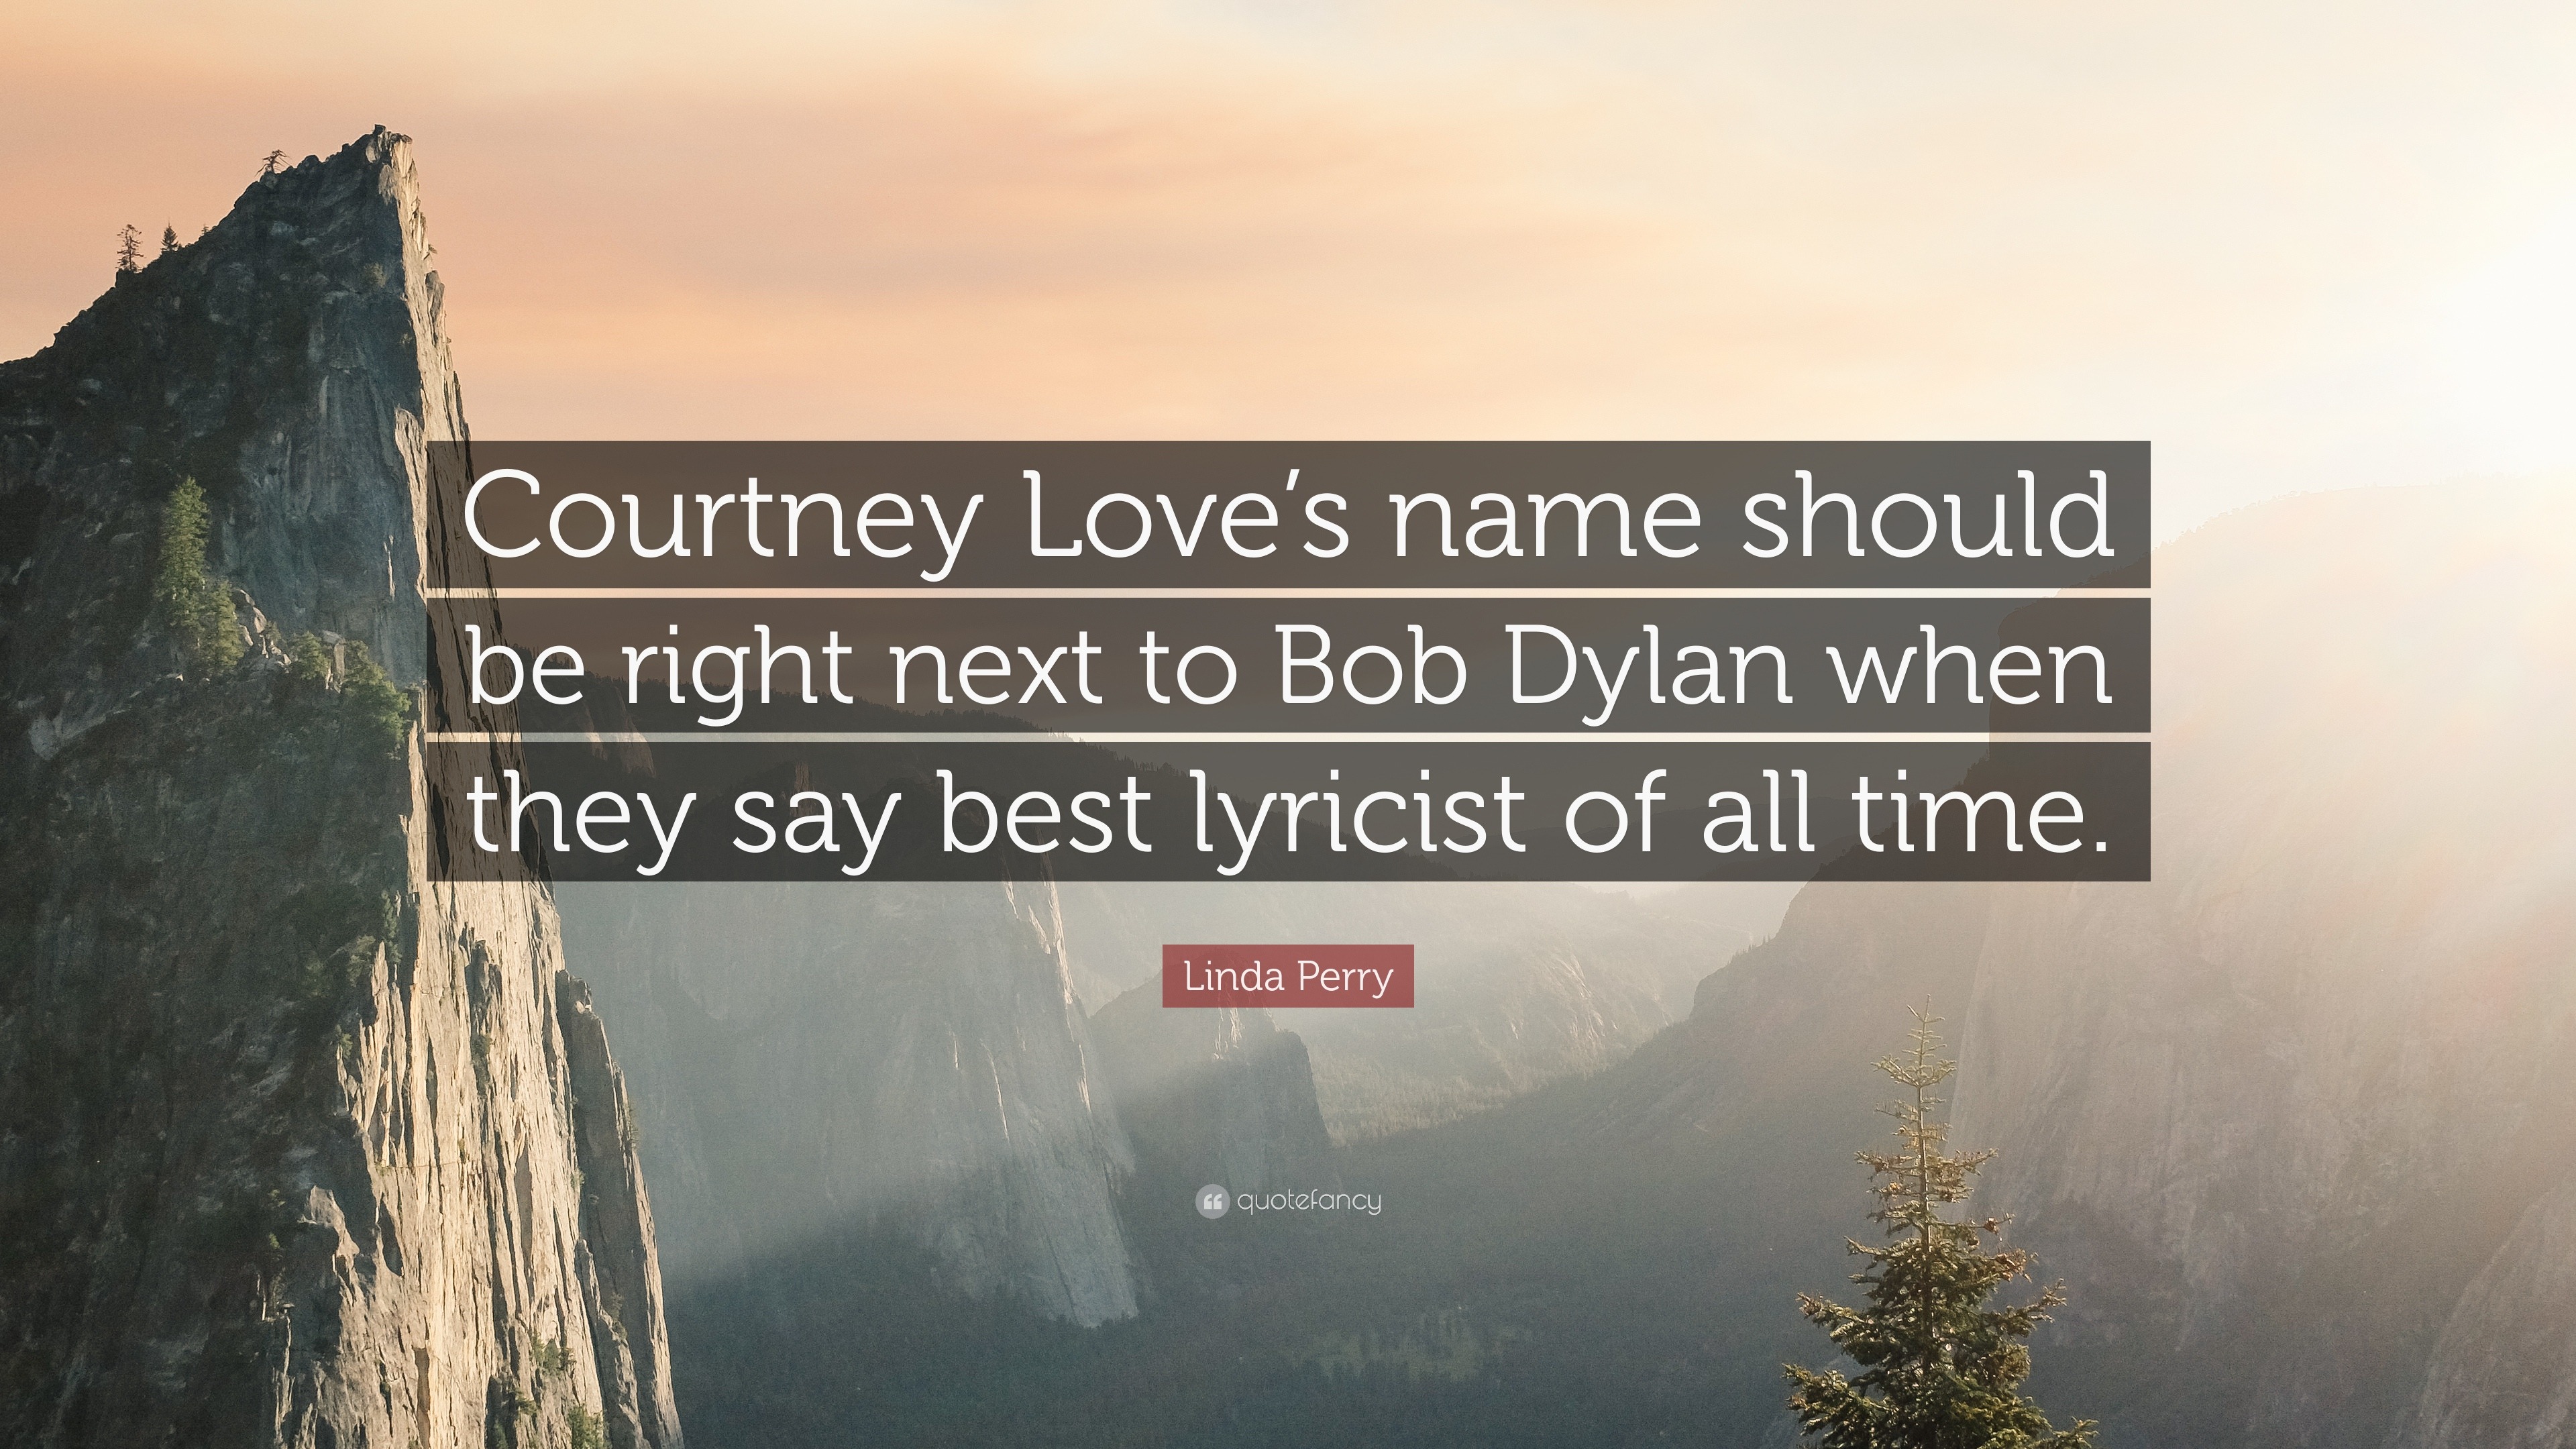 Linda Perry Quote “Courtney Love s name should be right next to Bob Dylan when